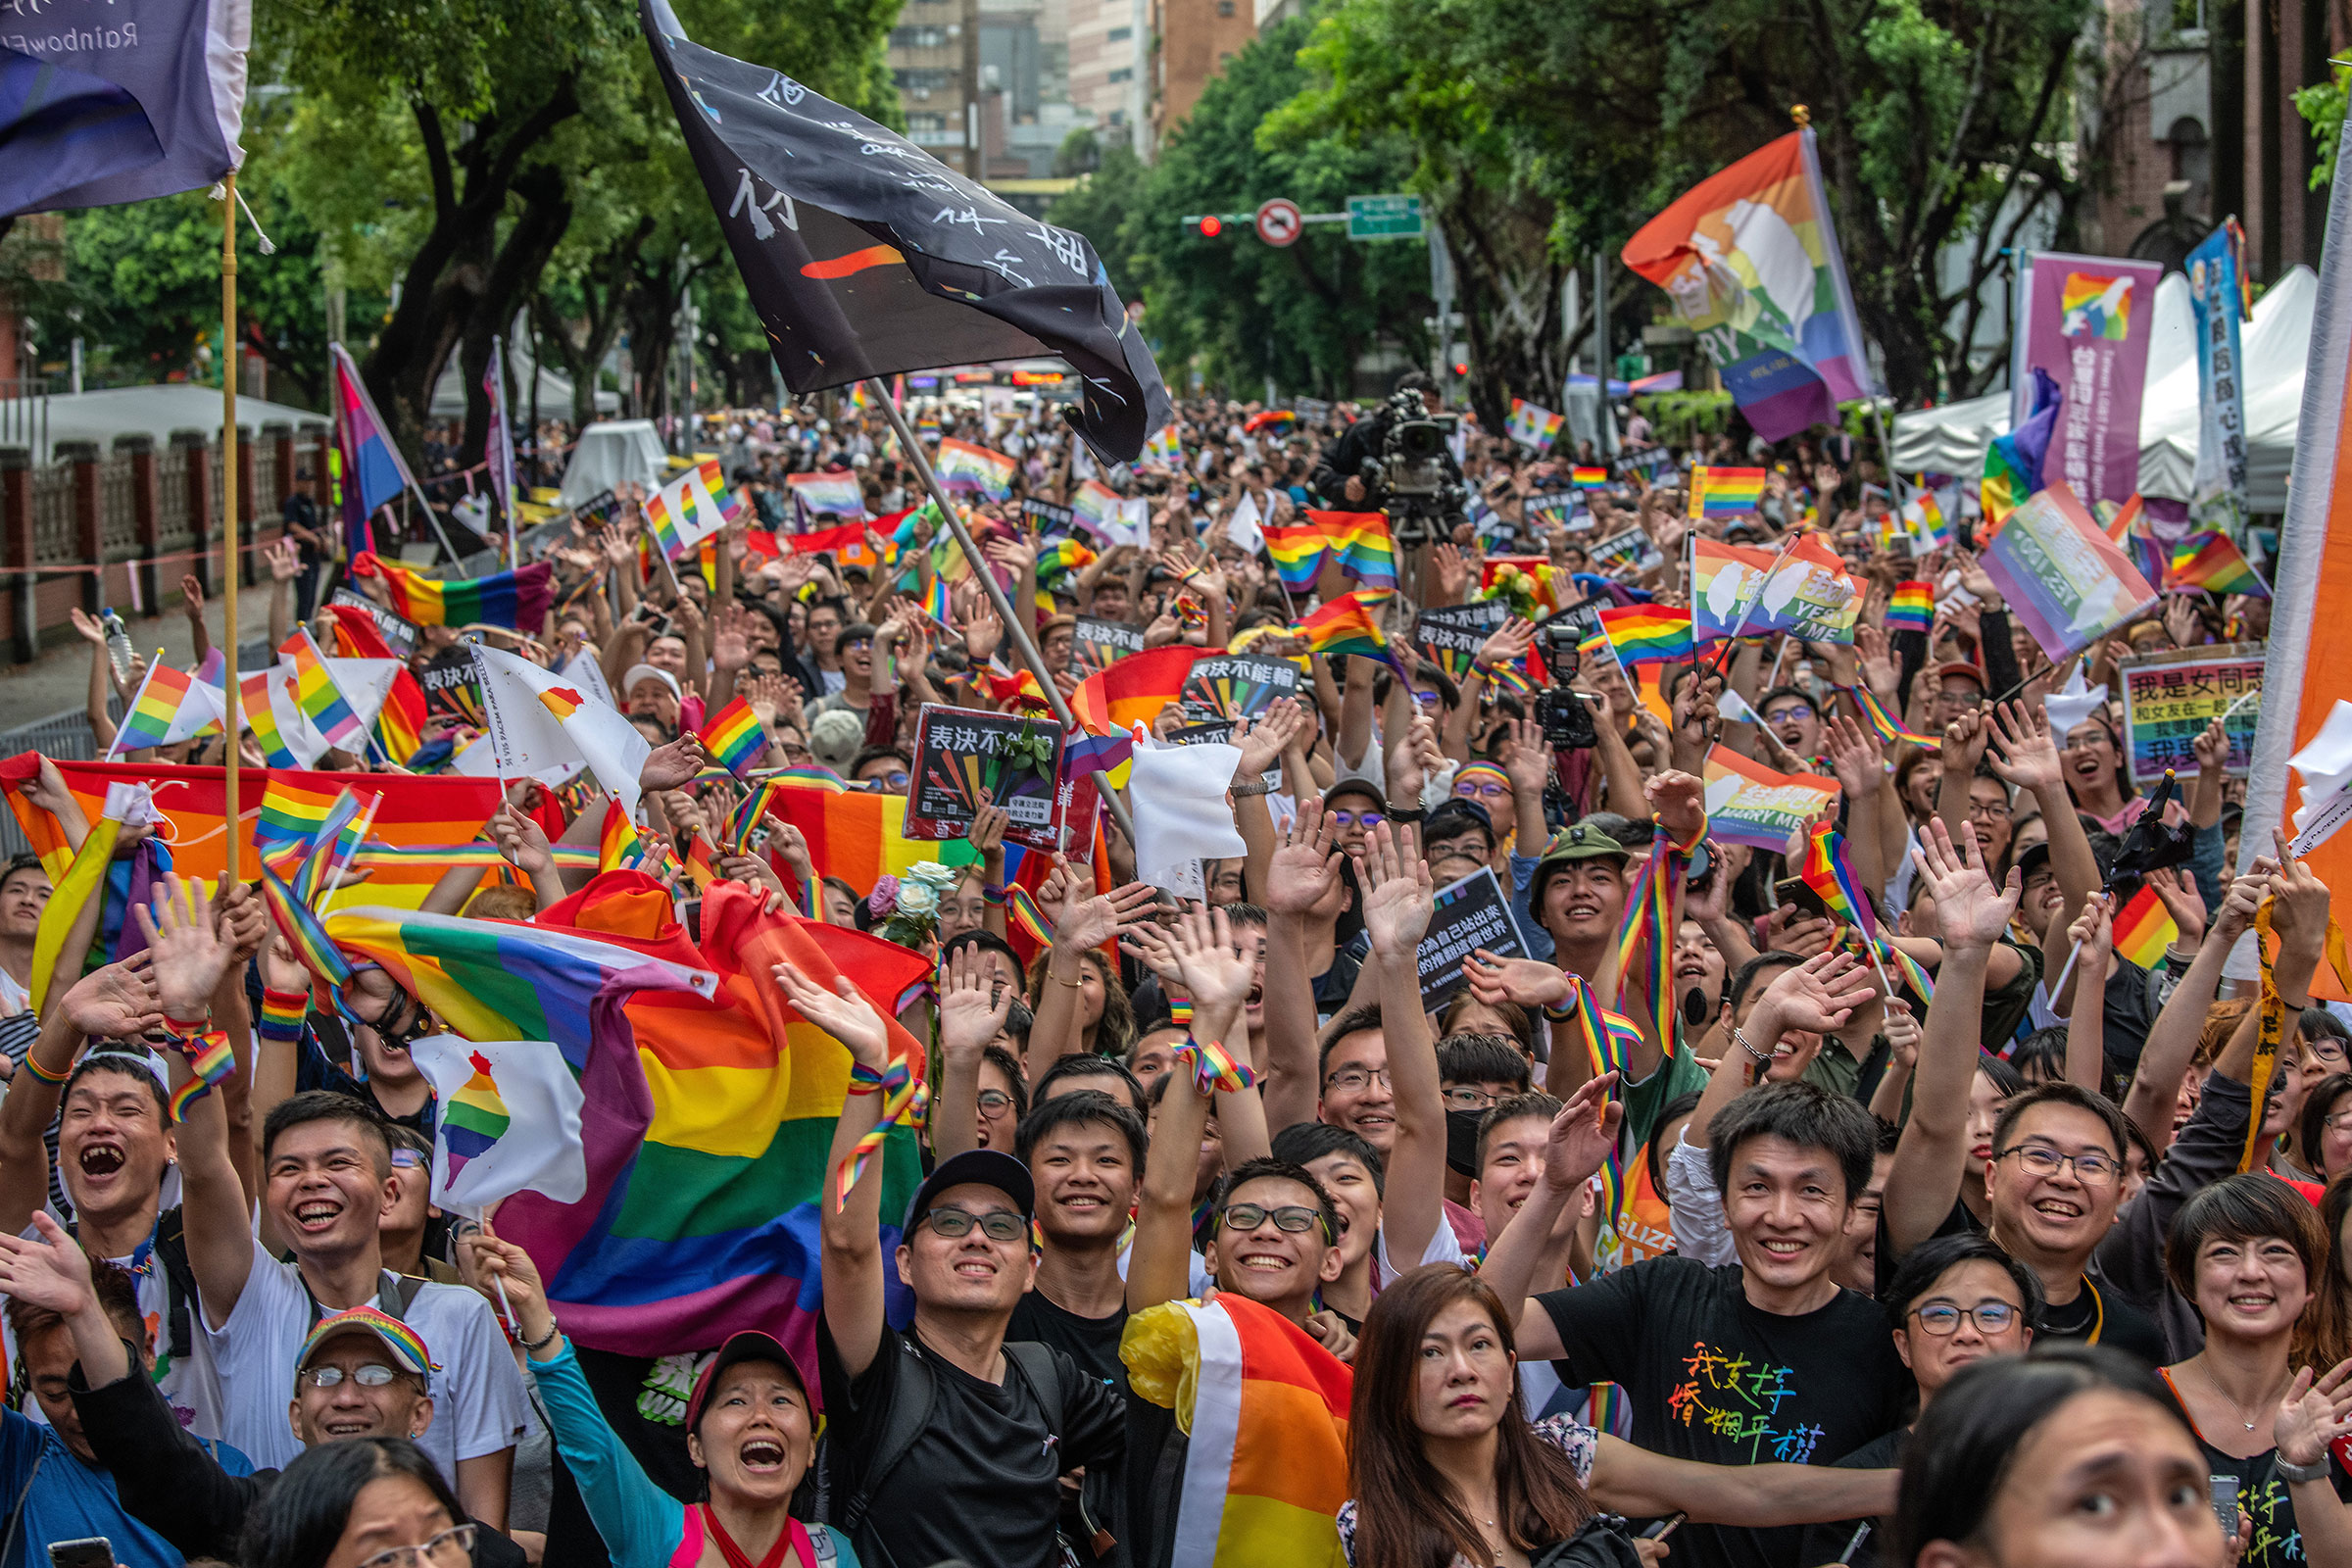 People celebrate after Taiwan's parliament voted to legalize same-sex marriage on May 17, 2019 in Taipei, Taiwan. (Carl Court—Getty Images)